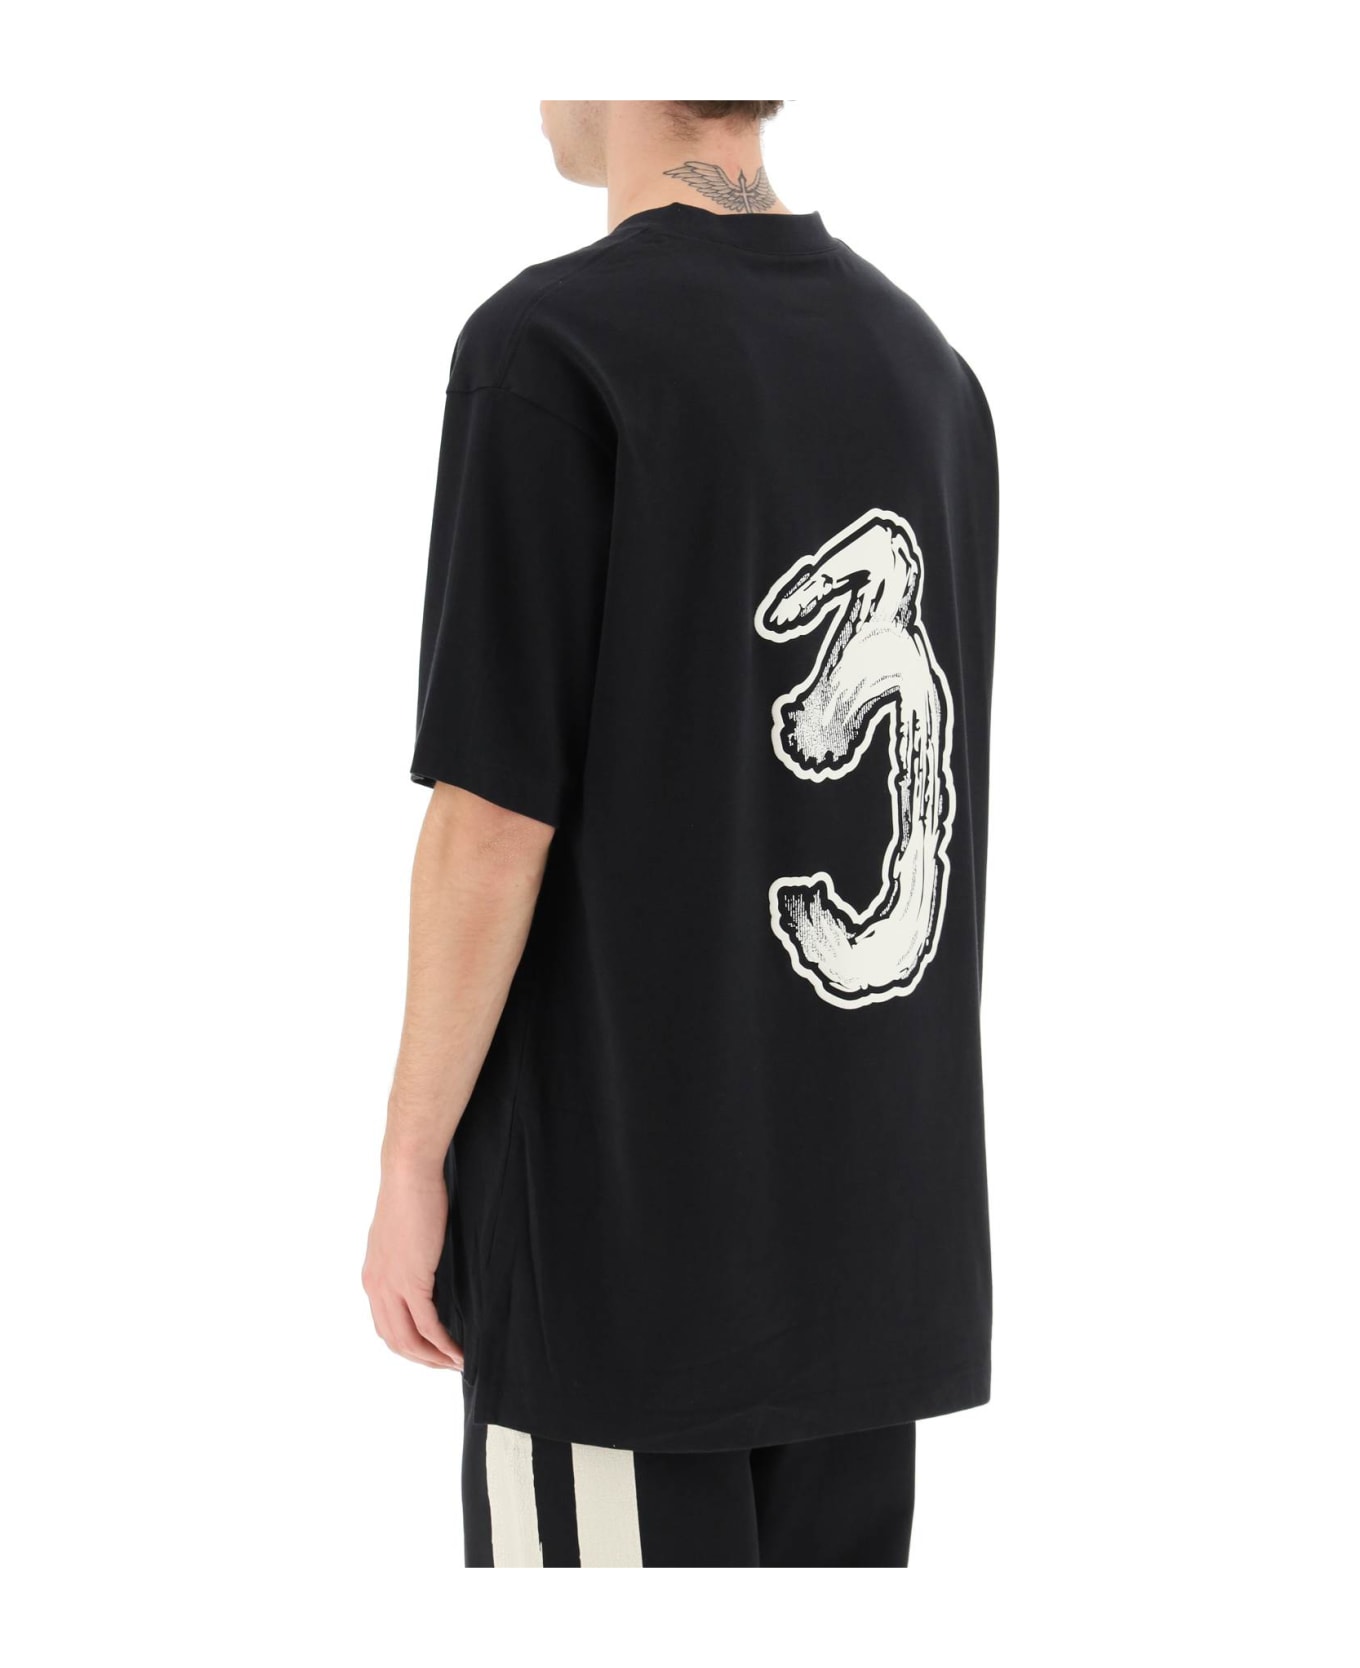 Y-3 Oversized T-shirt Featuring Maxi Logo At Front And Back | italist ...